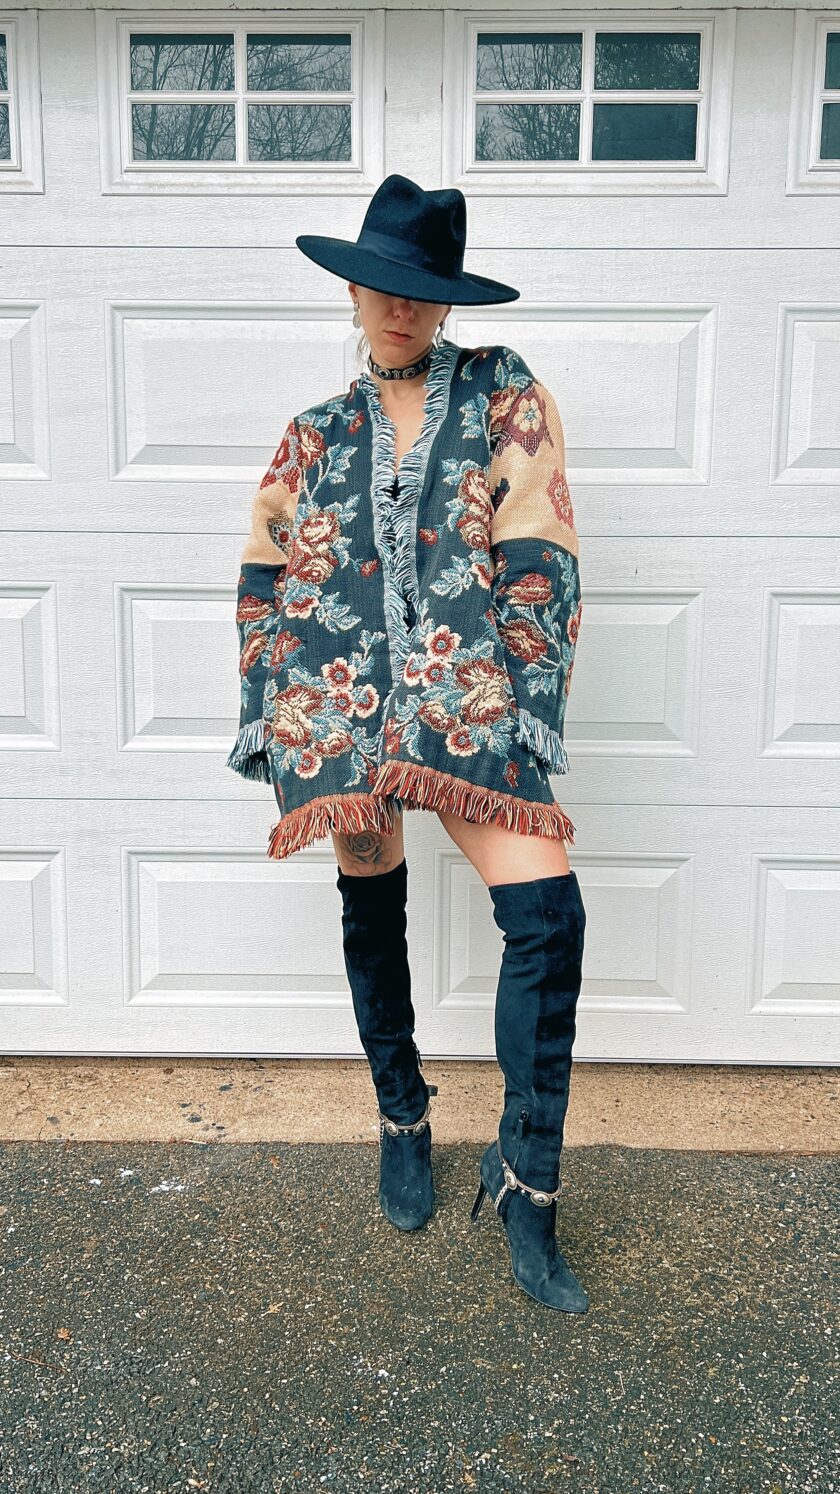 A person in a wide-brimmed hat, floral kimono, distressed jeans, and thigh-high boots standing in front of a garage door.